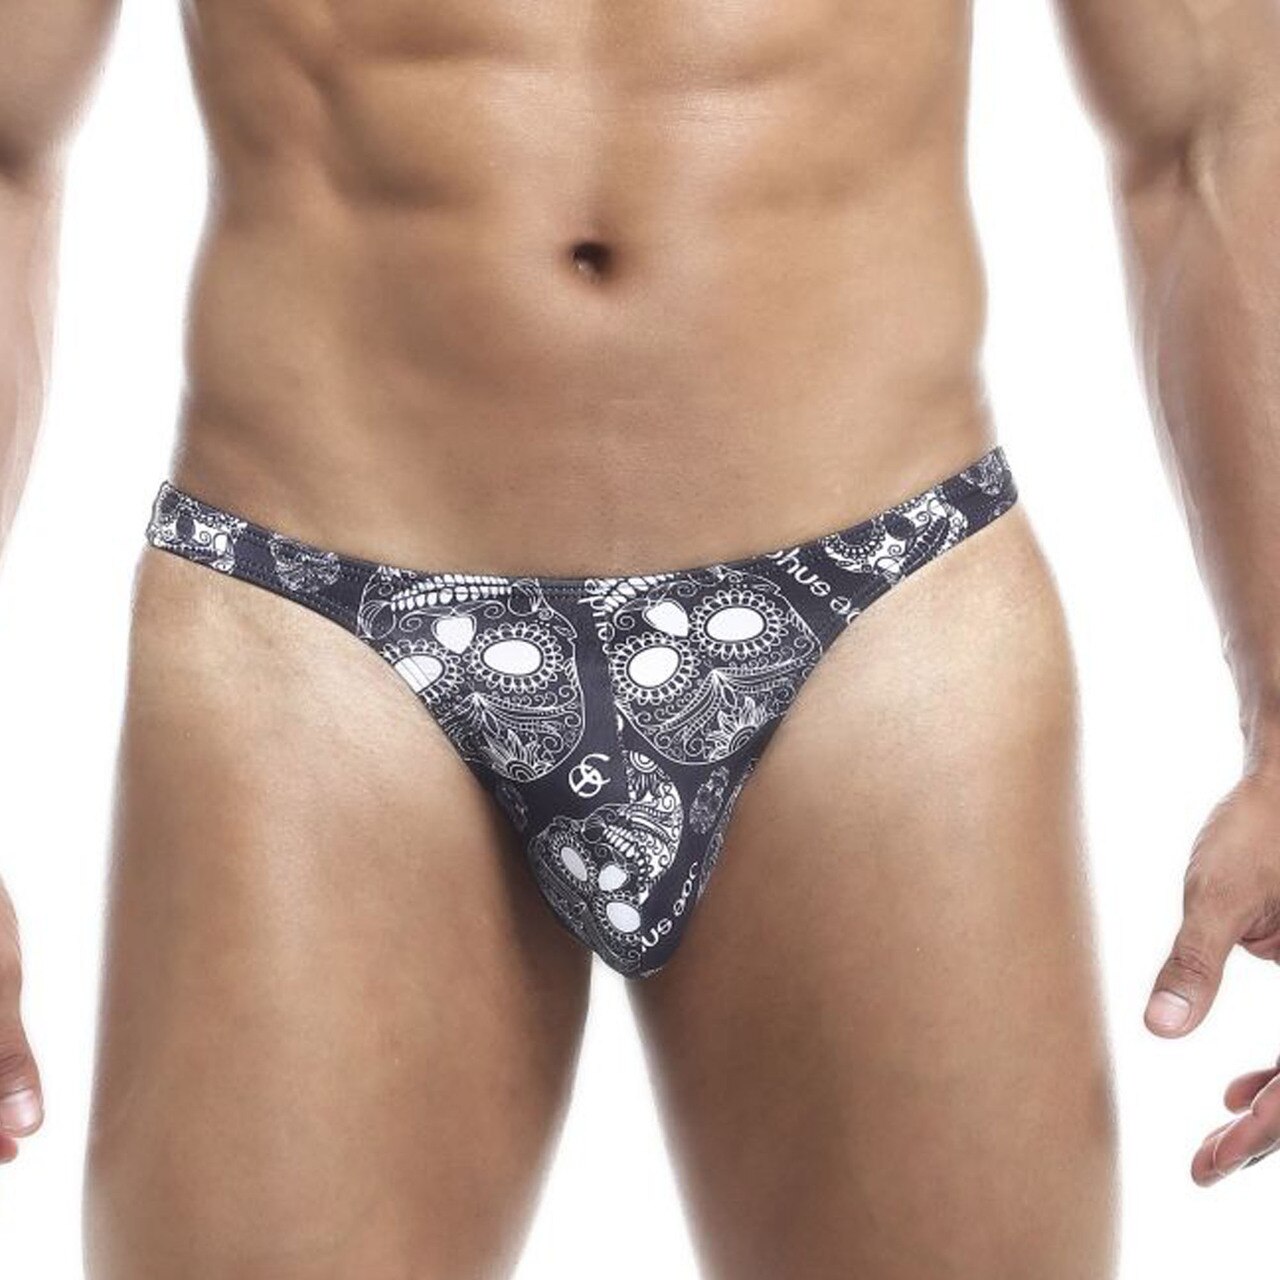 New Thongs and Bikinis for men by Joe Snyder in store!